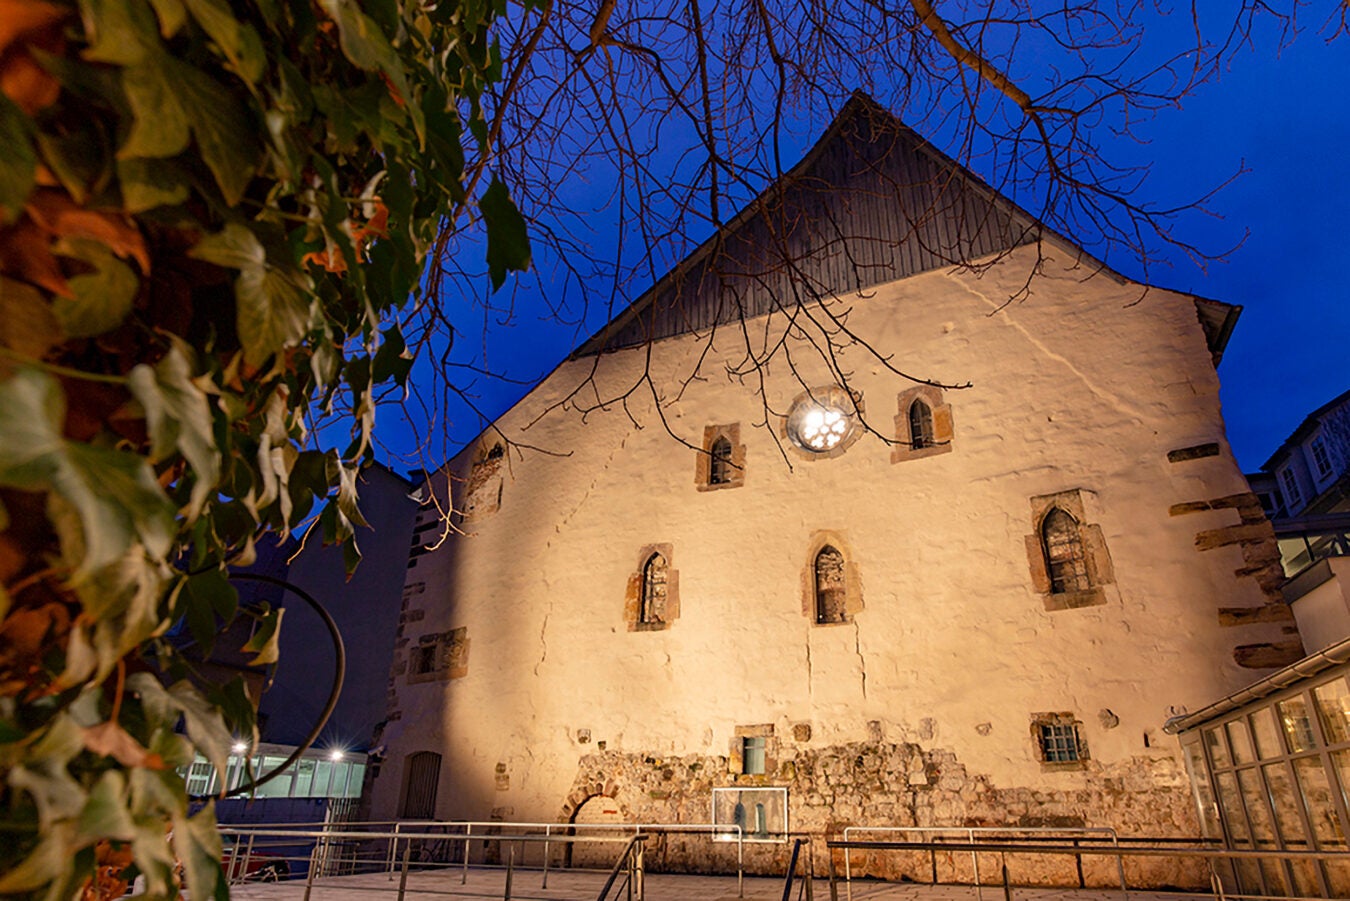 The Old Synagogue of the medieval Jewish community of Erfurt.